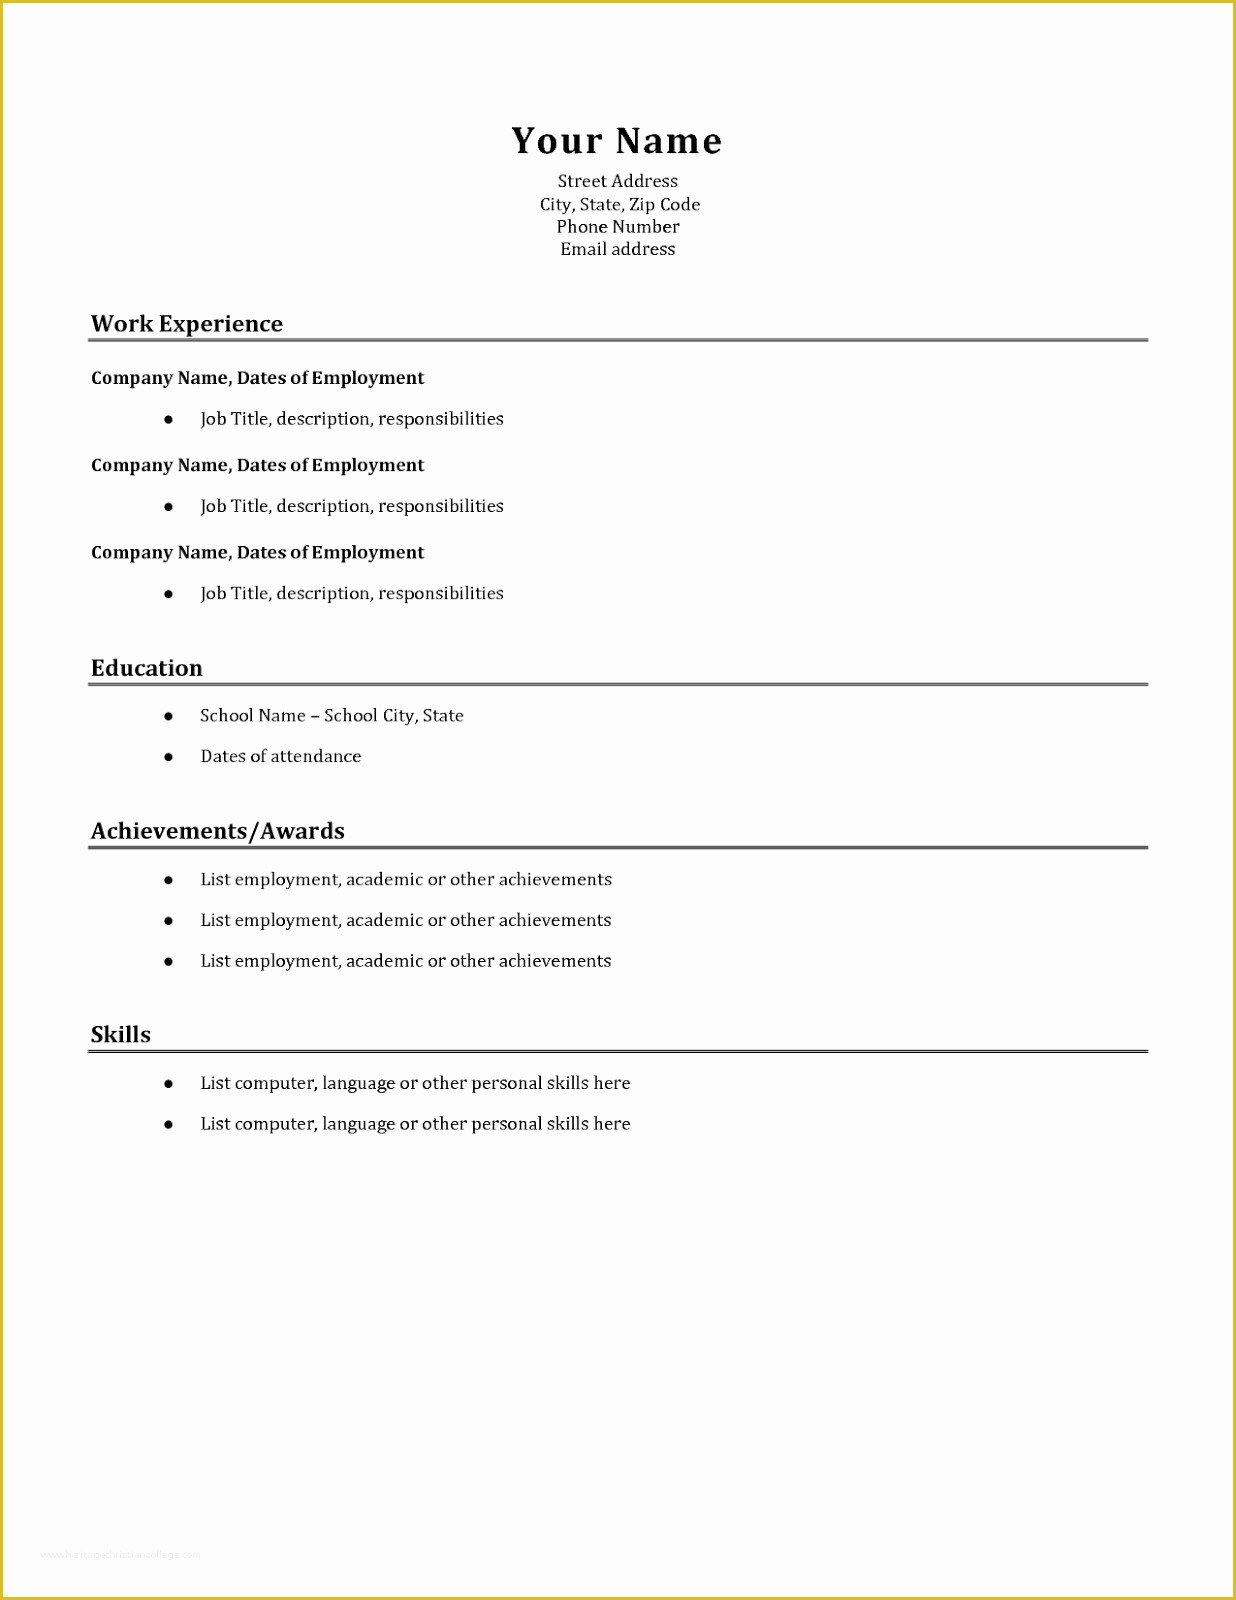 View Free Resume Templates Of Draw Mountain Landscape Tutorial Youtube Building Plans